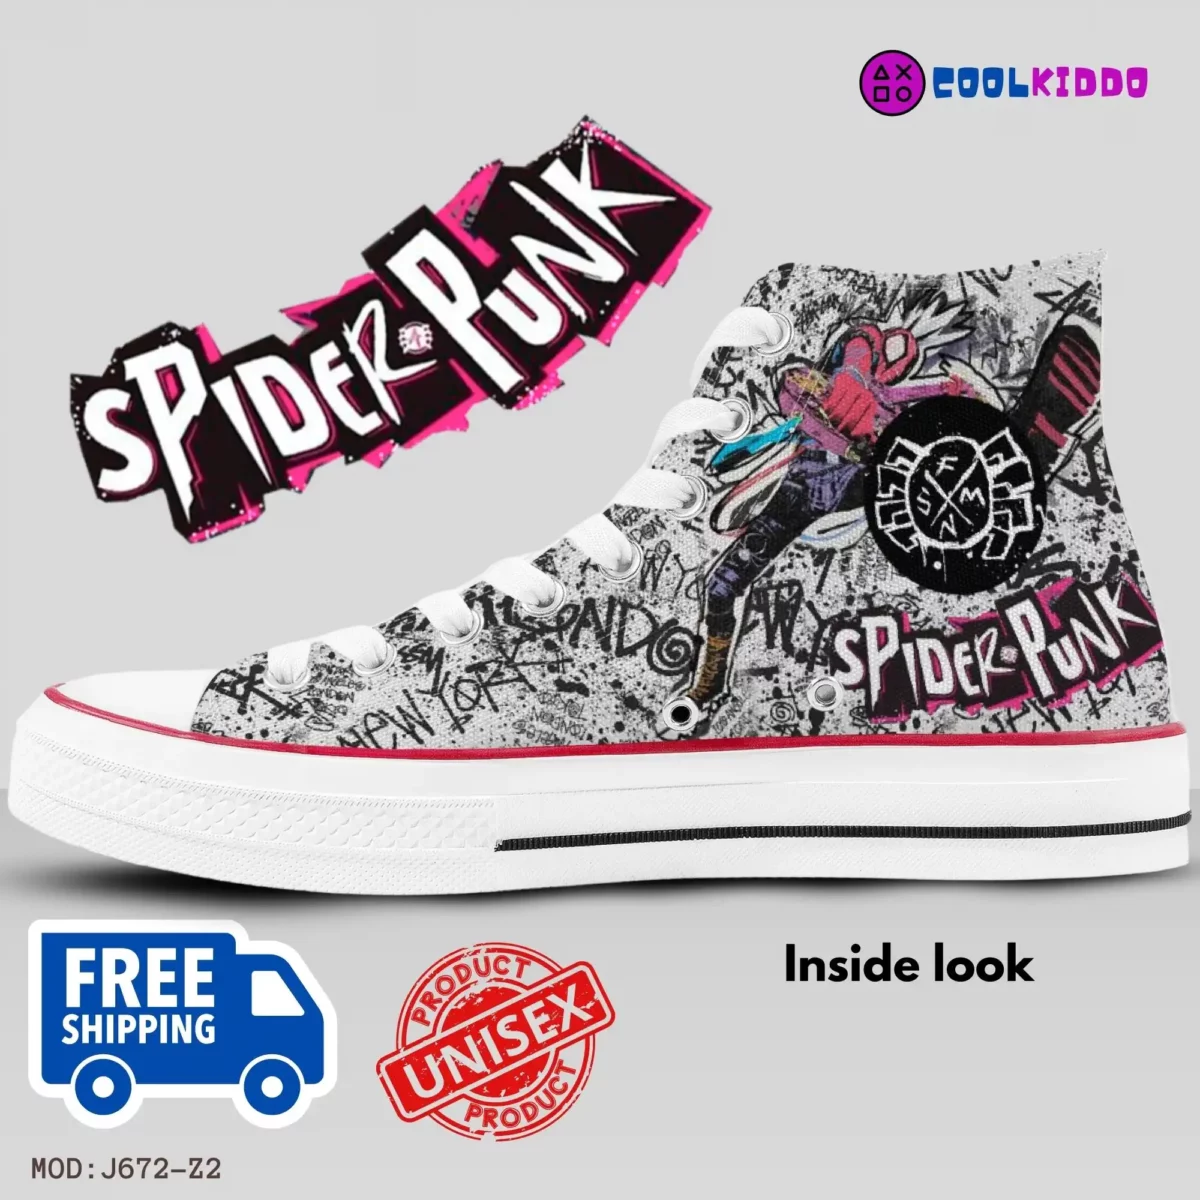 Spiderman Spider Punk High-Top Canvas Shoes from the Spider-Verse Movie | Adult/Youth – White Sole Spiderman Sneakers Cool Kiddo 10